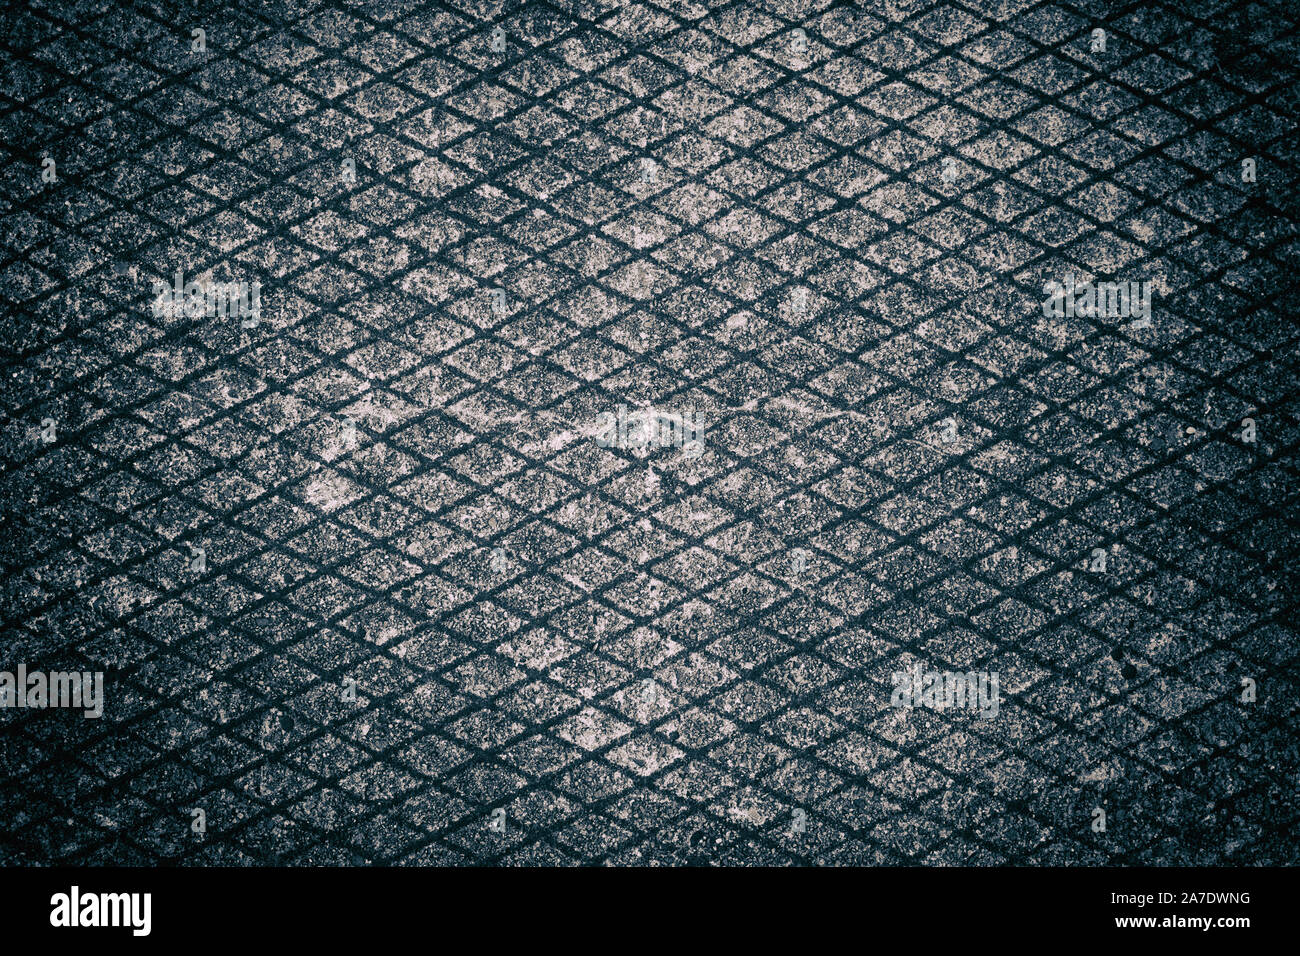 Cement texture background with rhombus shaped pattern Stock Photo